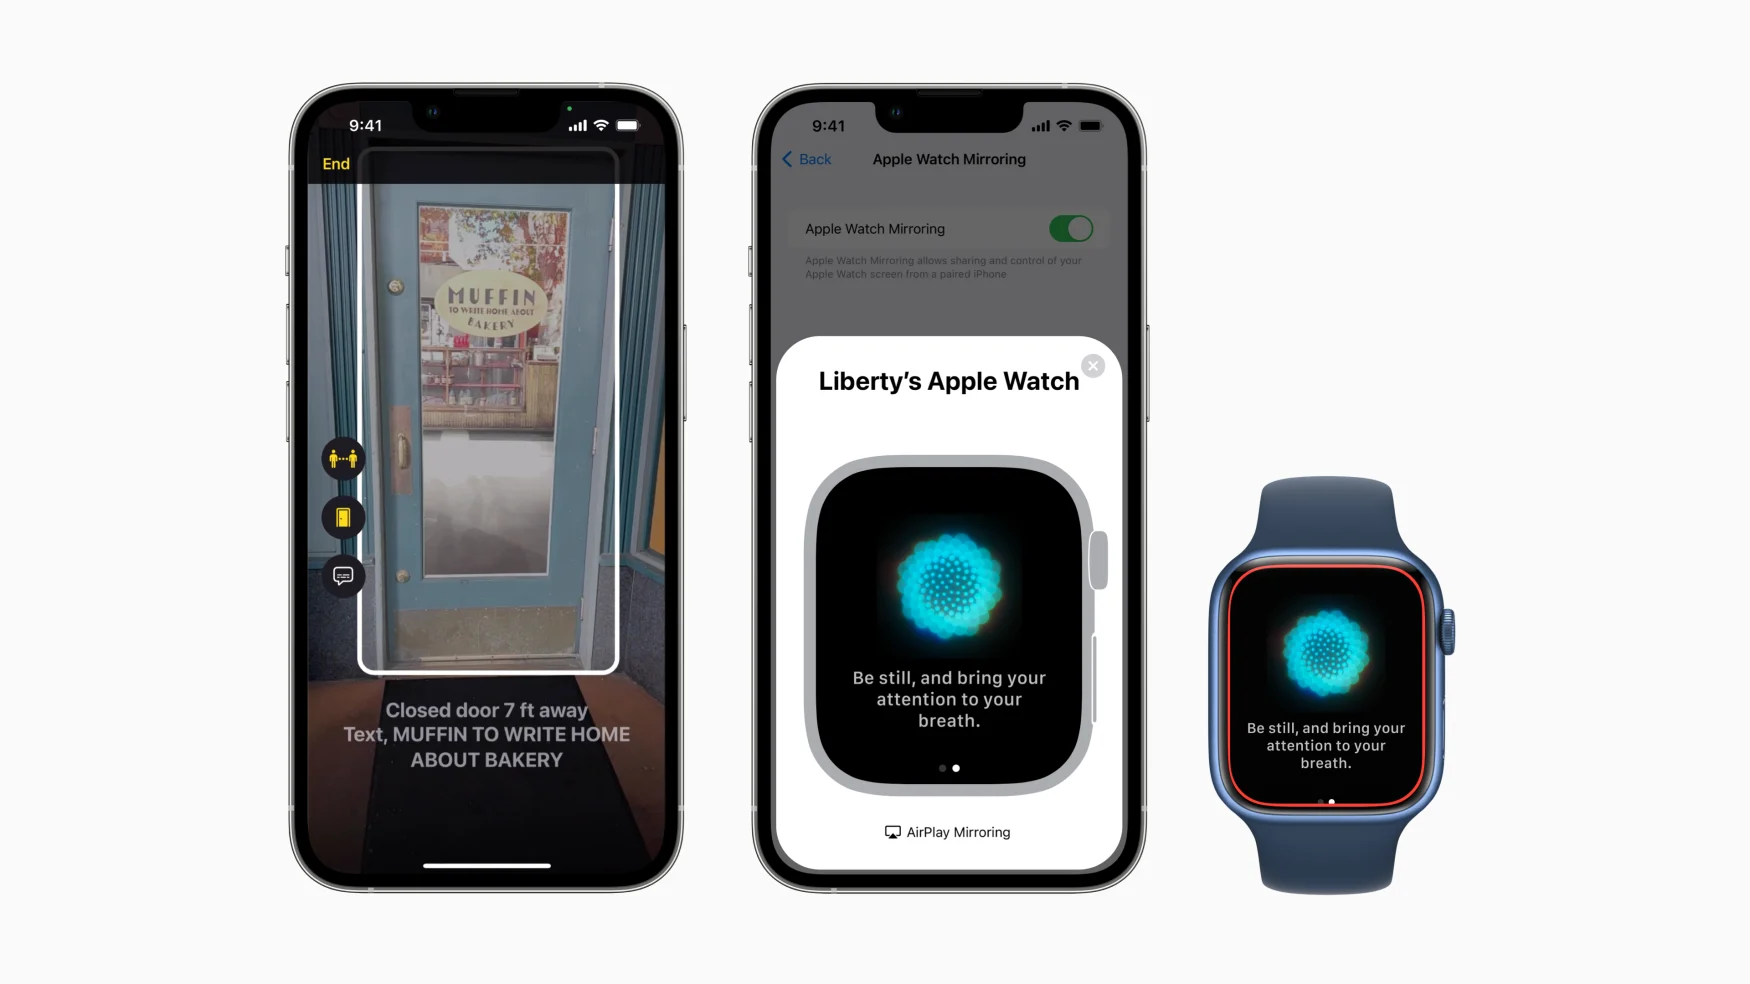 Two iPhones and an Apple Watch showcasing Apple's new accessibility features. The iPhone on the left shows the new door detection tool in Magnifier, while the iPhone in the middle and the Watch on the right show the new mirroring feature.